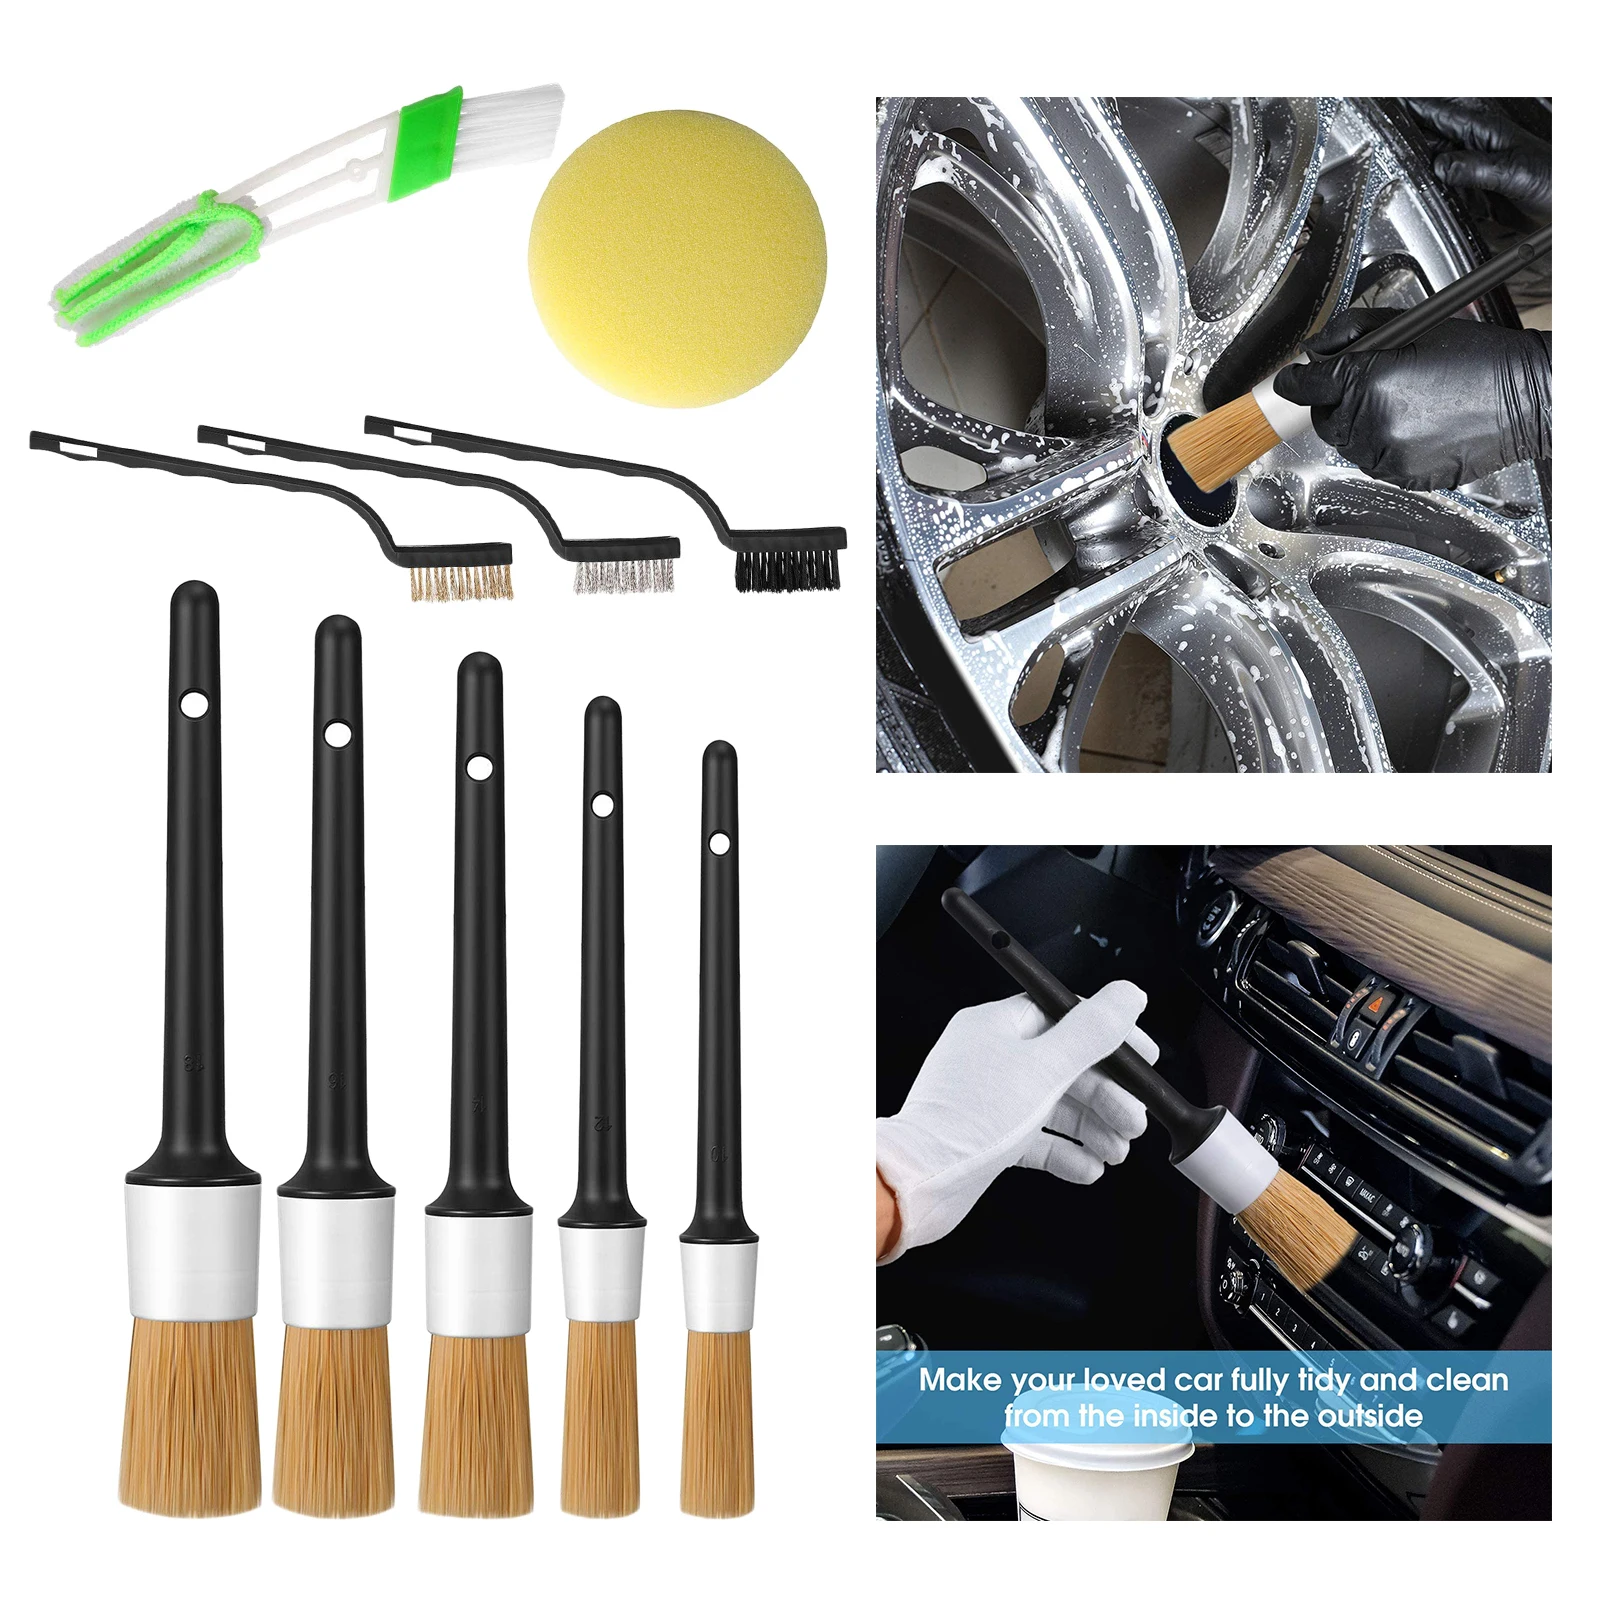 cleaning leather seats 5/ 10pcs Car Detailing Brush Set Car Cleaning Brushes Cleaning Wheel Detail Brush Detailing Brush Set Air Vents Brush Sponge Wax turtle wax ice